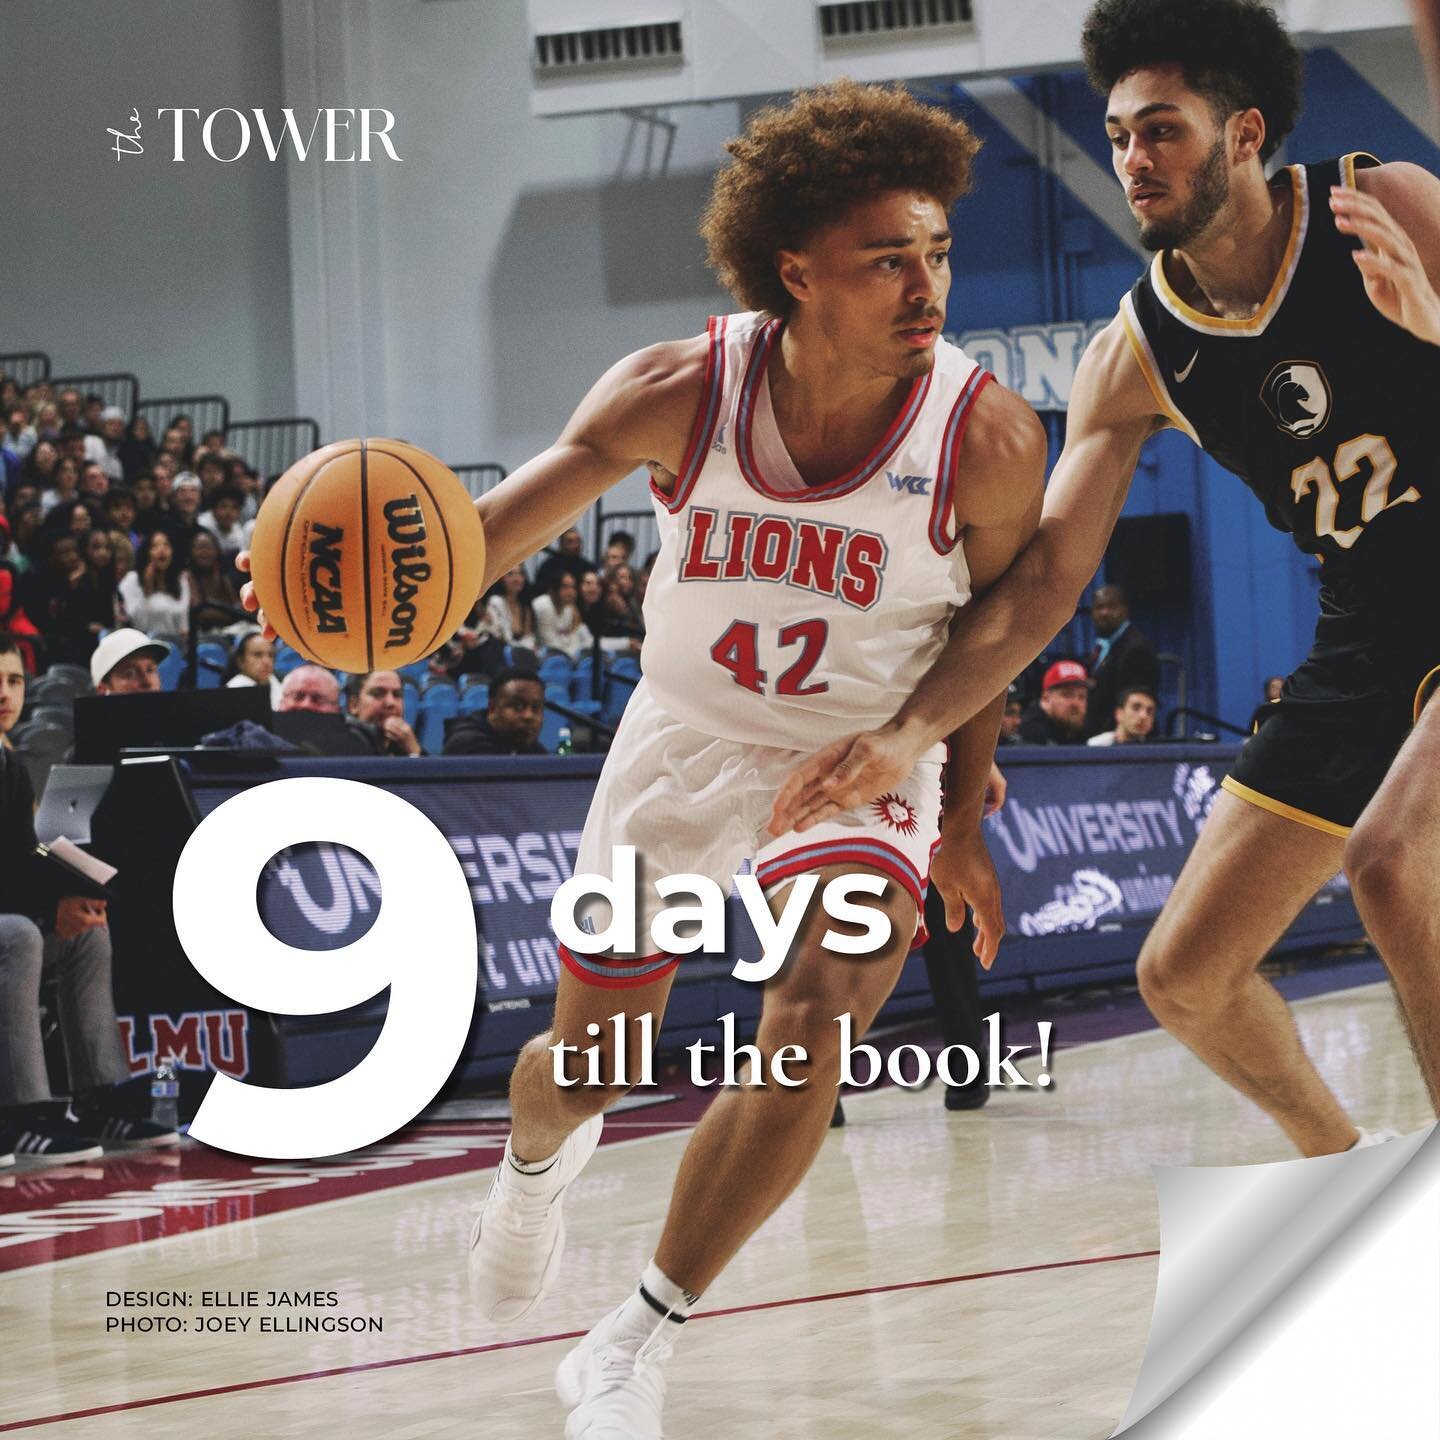 Listen up! 9 days until the 2023 Tower Yearbook reveal! Don&rsquo;t miss out on our distribution dates! 

Photo: Joey Ellingson | Tower

For more information about distribution, visit our website or click on our linktr.ee in our bio!